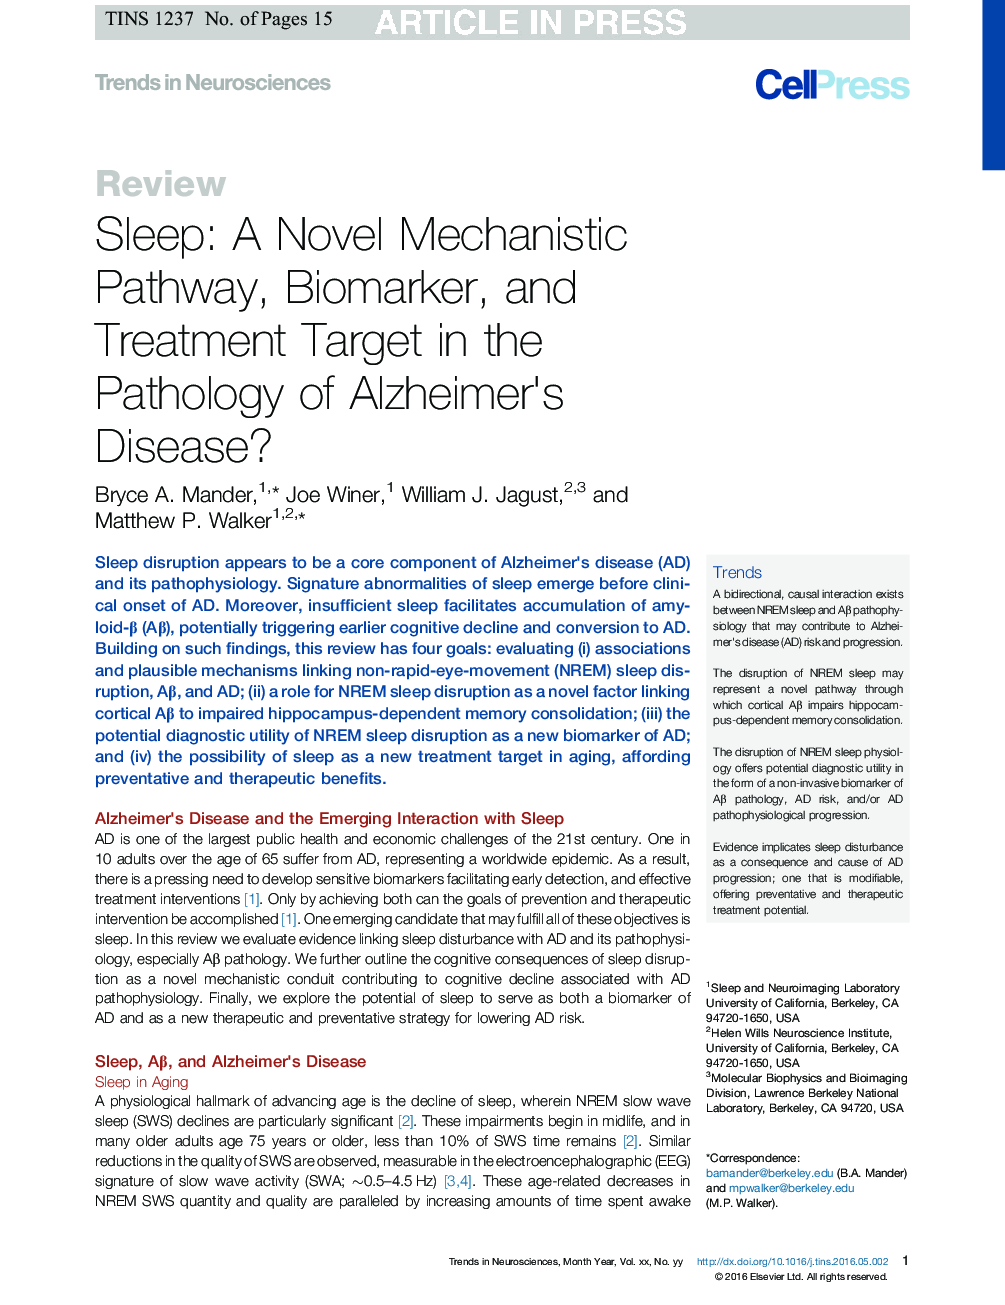 Sleep: A Novel Mechanistic Pathway, Biomarker, and Treatment Target in the Pathology of Alzheimer's Disease?